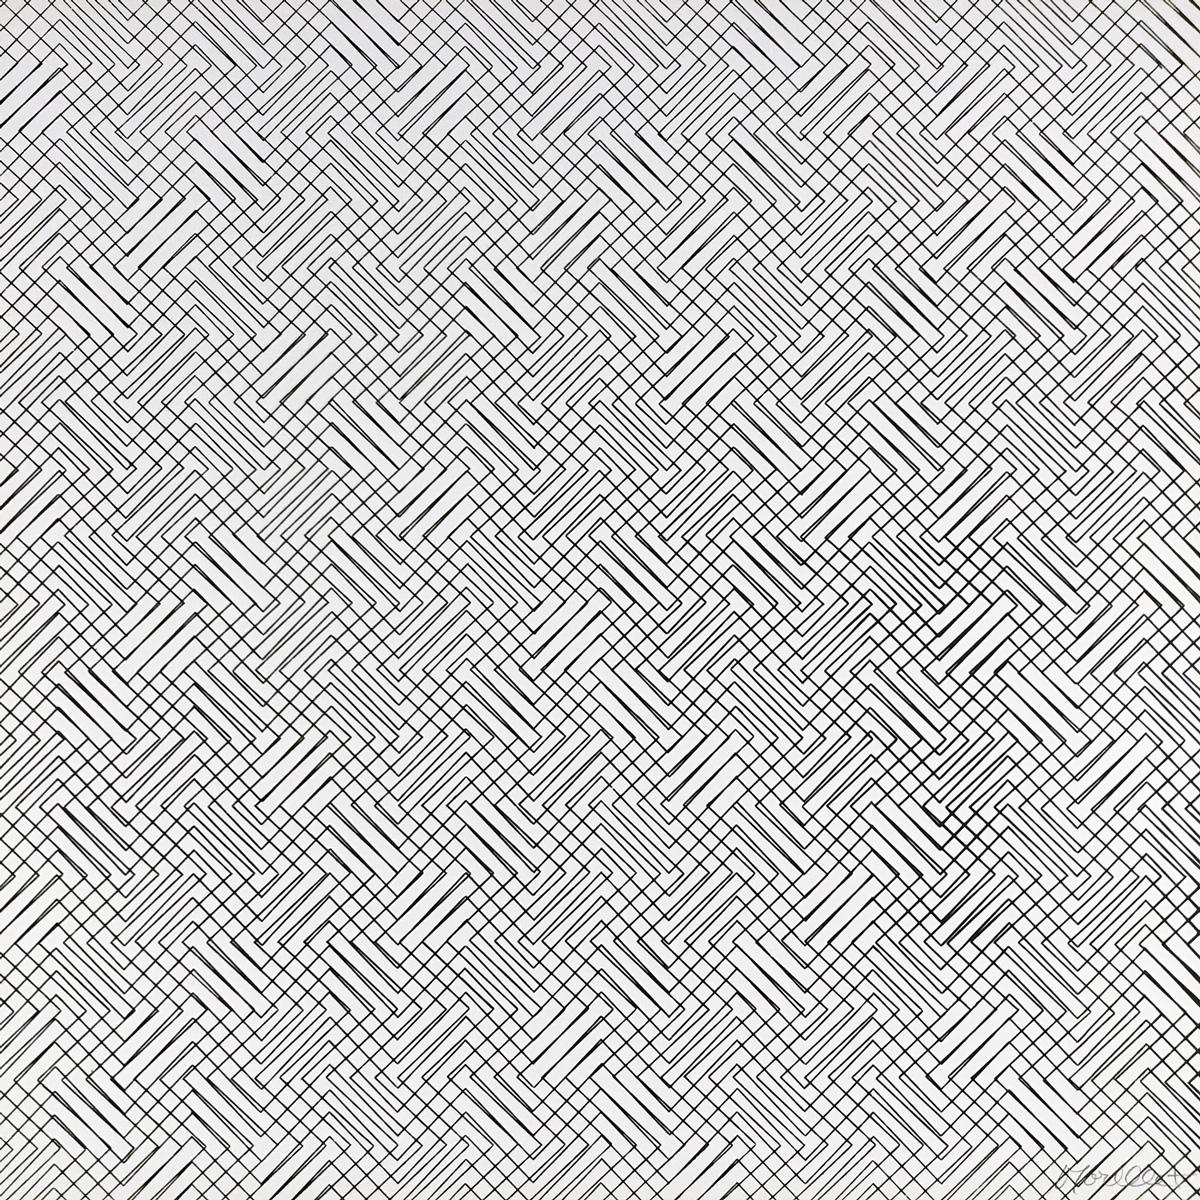 François Morellet (French, 1926-2016)
Trames Portfolio, 1965
Medium: 8 screenprints on cardboard
Dimensions: 62 × 62 cm (24 2/5 × 24 2/5 in)
Edition of 125: Each serigraph hand signed and numbered in pencil
Publisher: Printed by Poldi Domberger